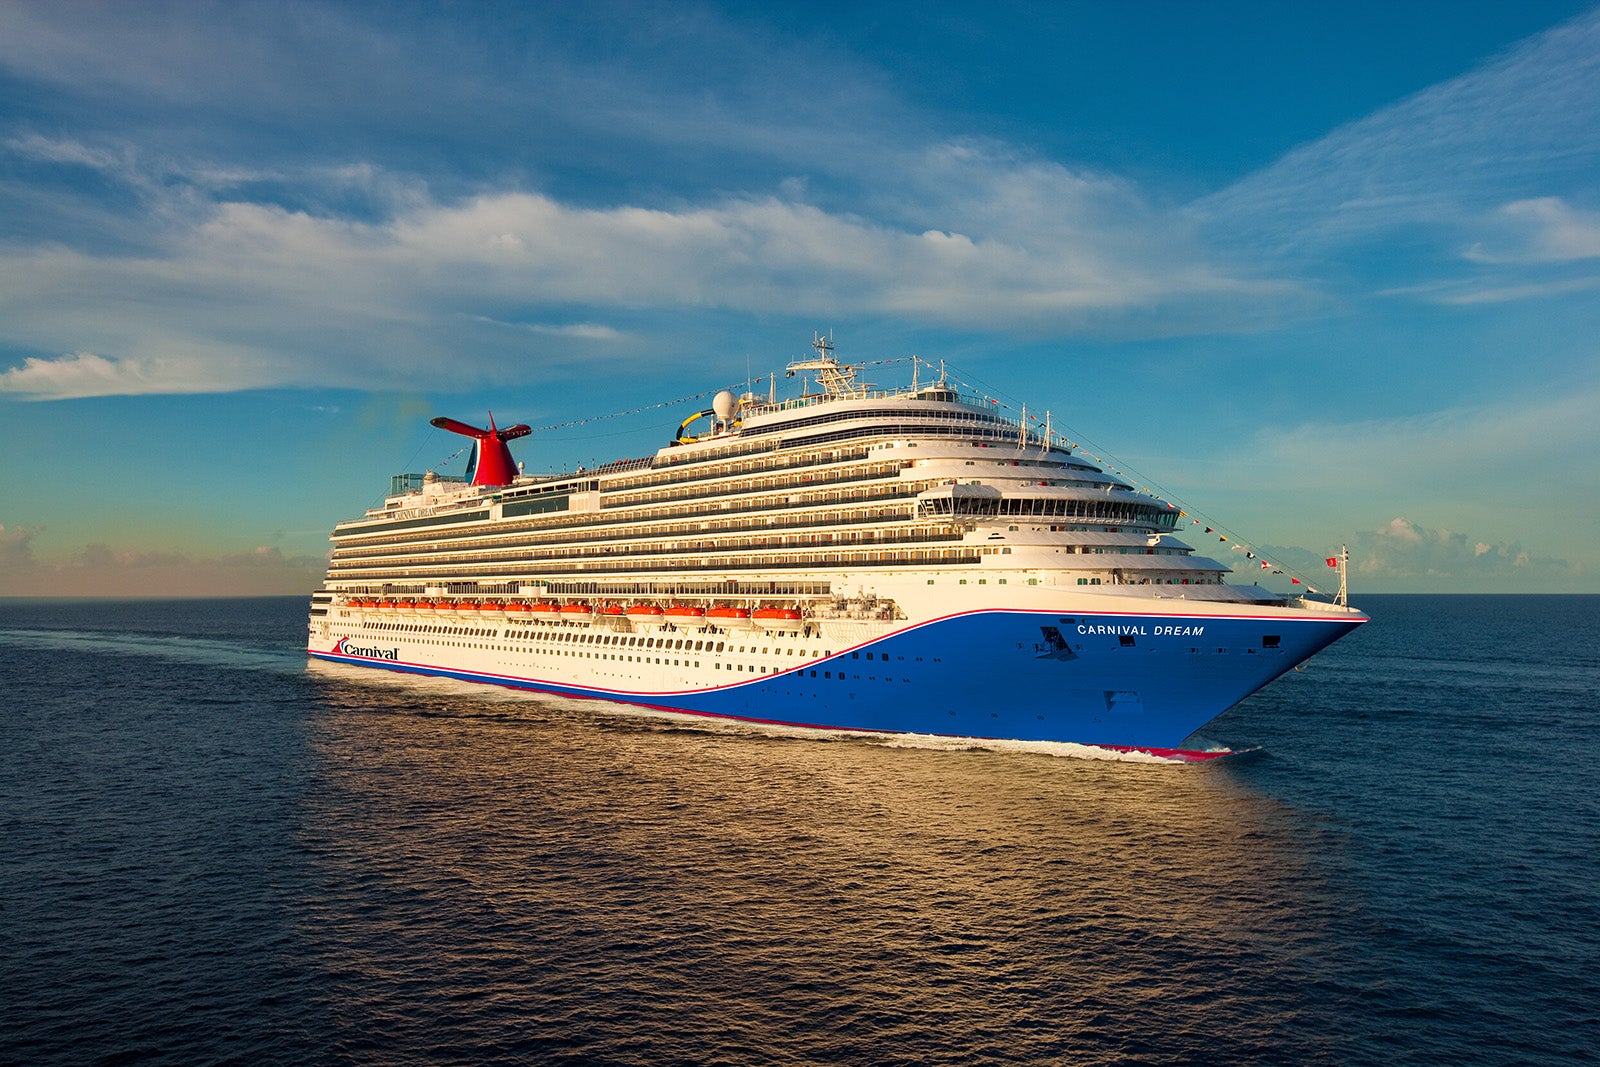 Which cruise lines does Carnival own? Here’s a list of cruise lines owned by Carnival Corp.